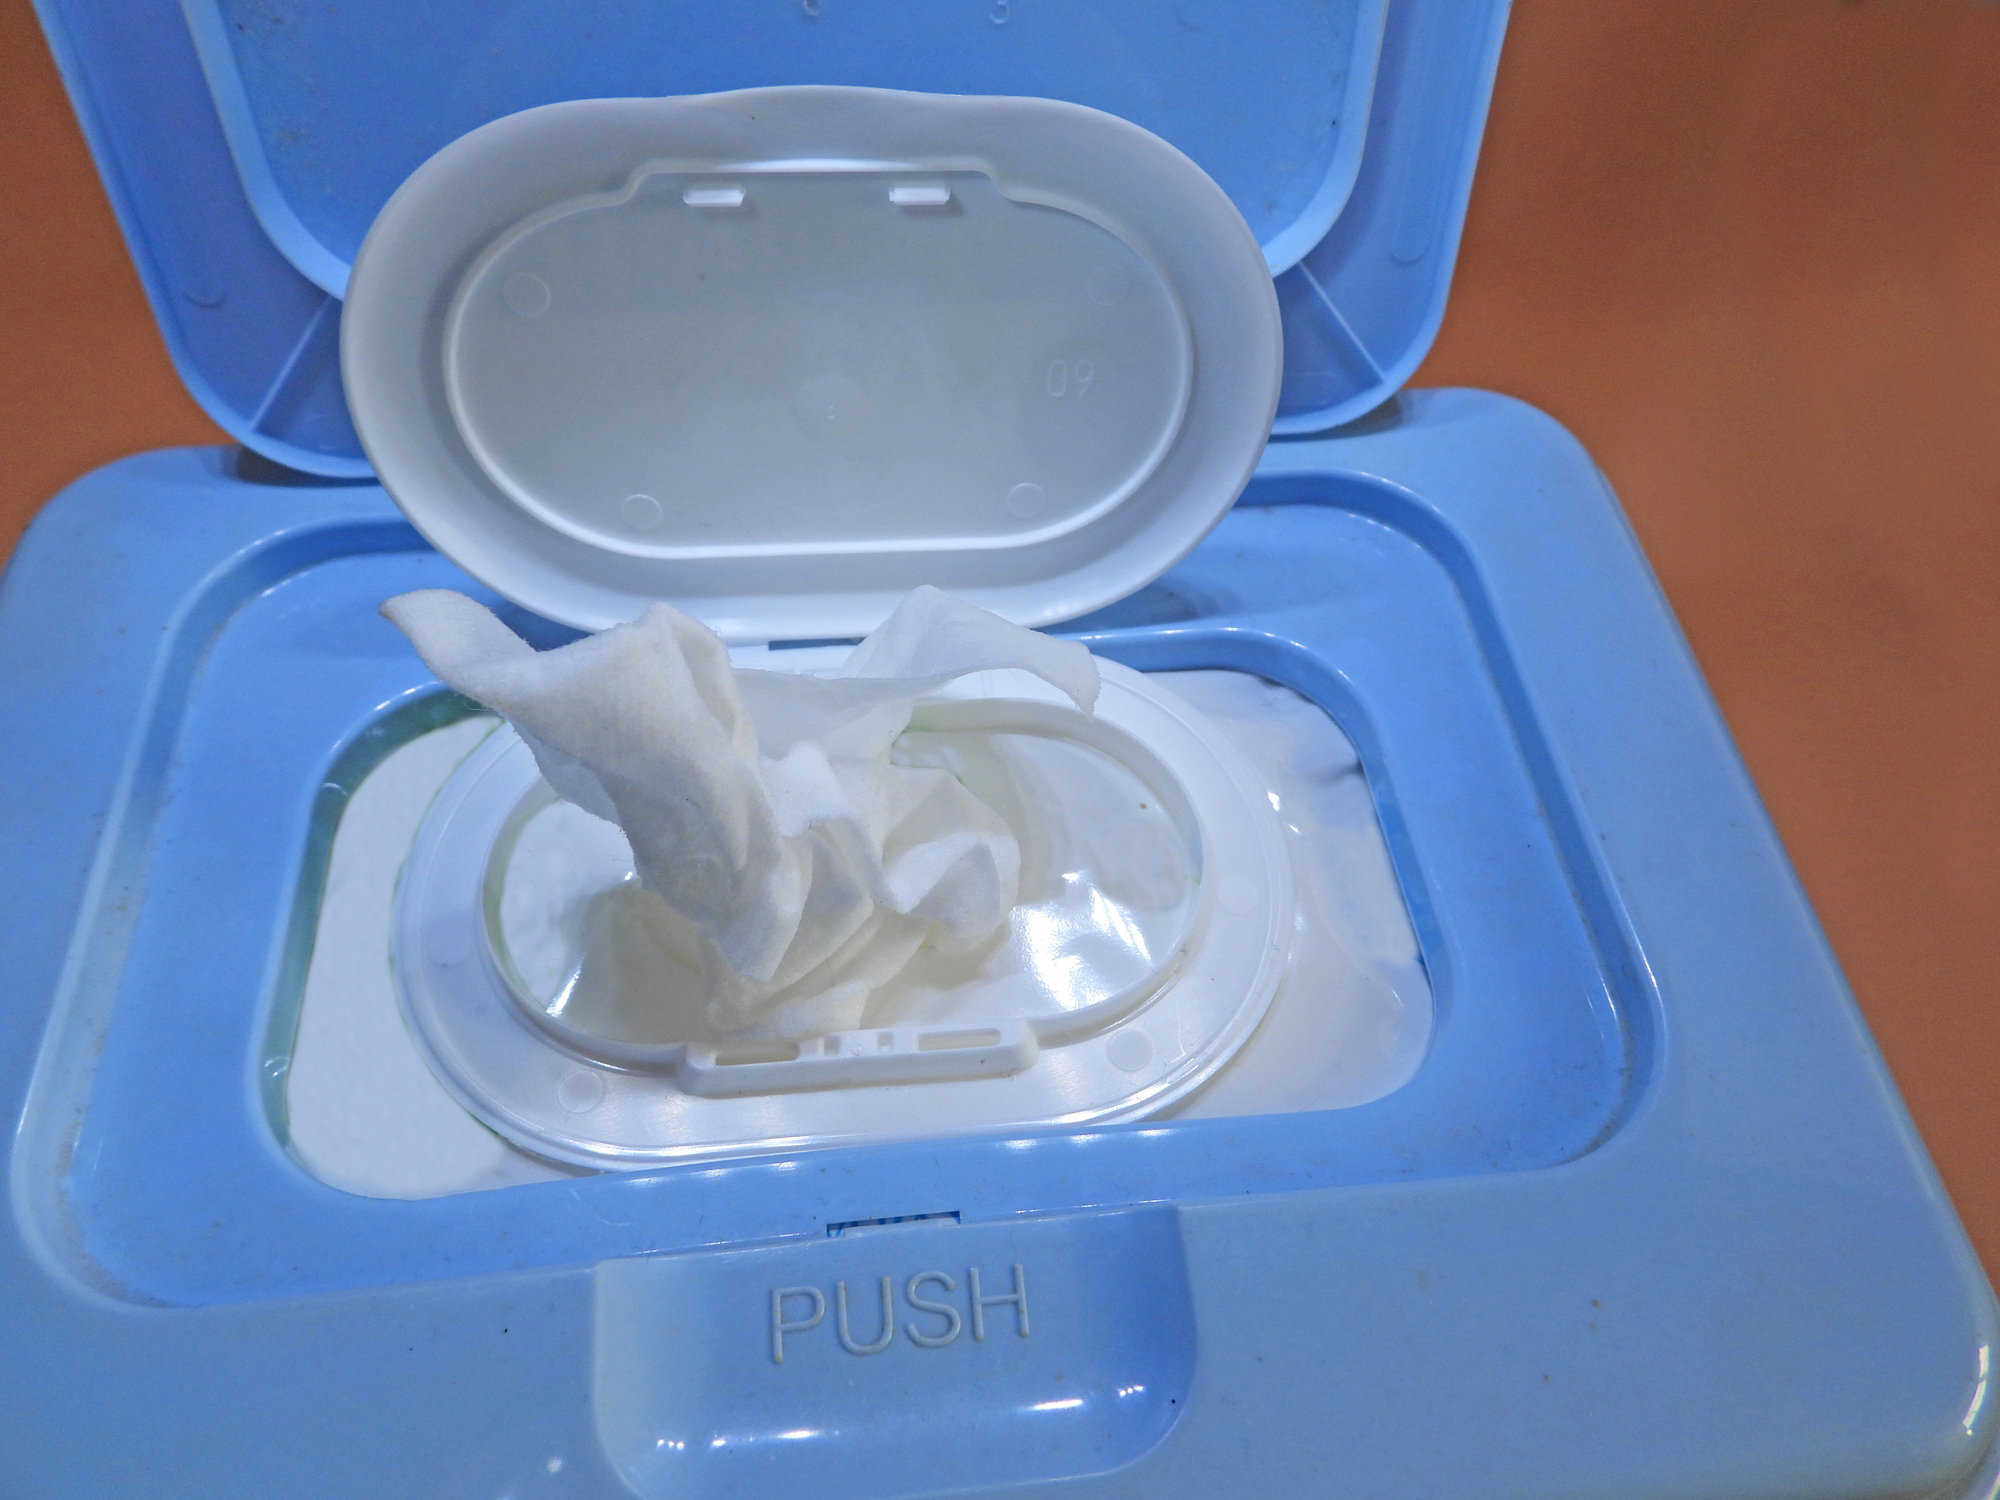 Wet wipe emerging from a plastic dispenser labeled &quot;PUSH,&quot; highlighting ease of use and accessibility